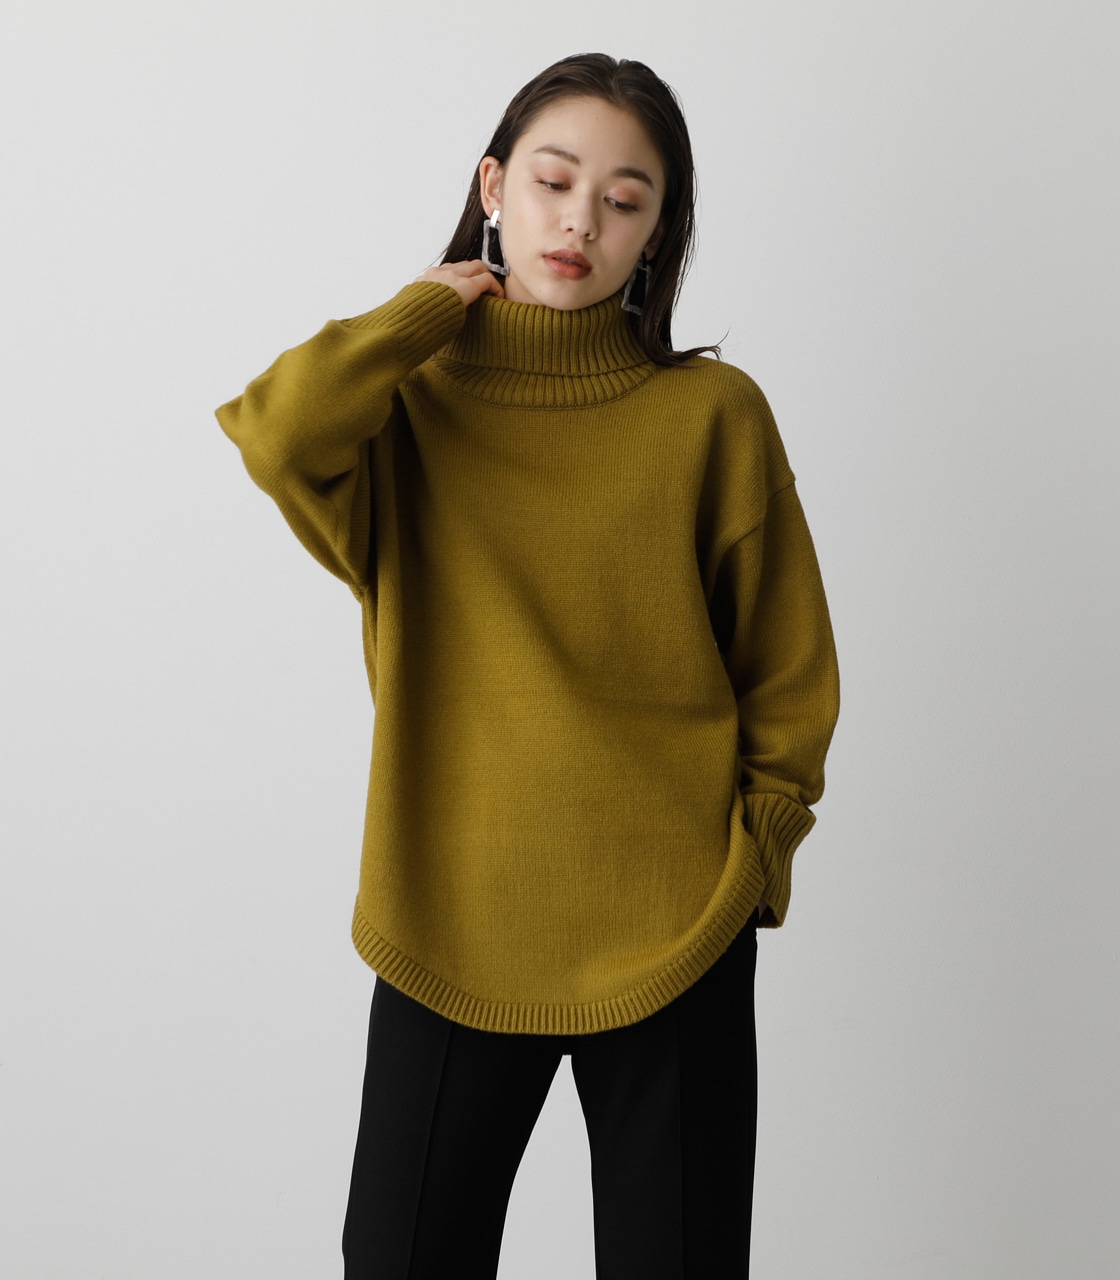 BIG TURTLE KNIT TOPS/ビッグタートルニットトップス 詳細画像 LIME 2